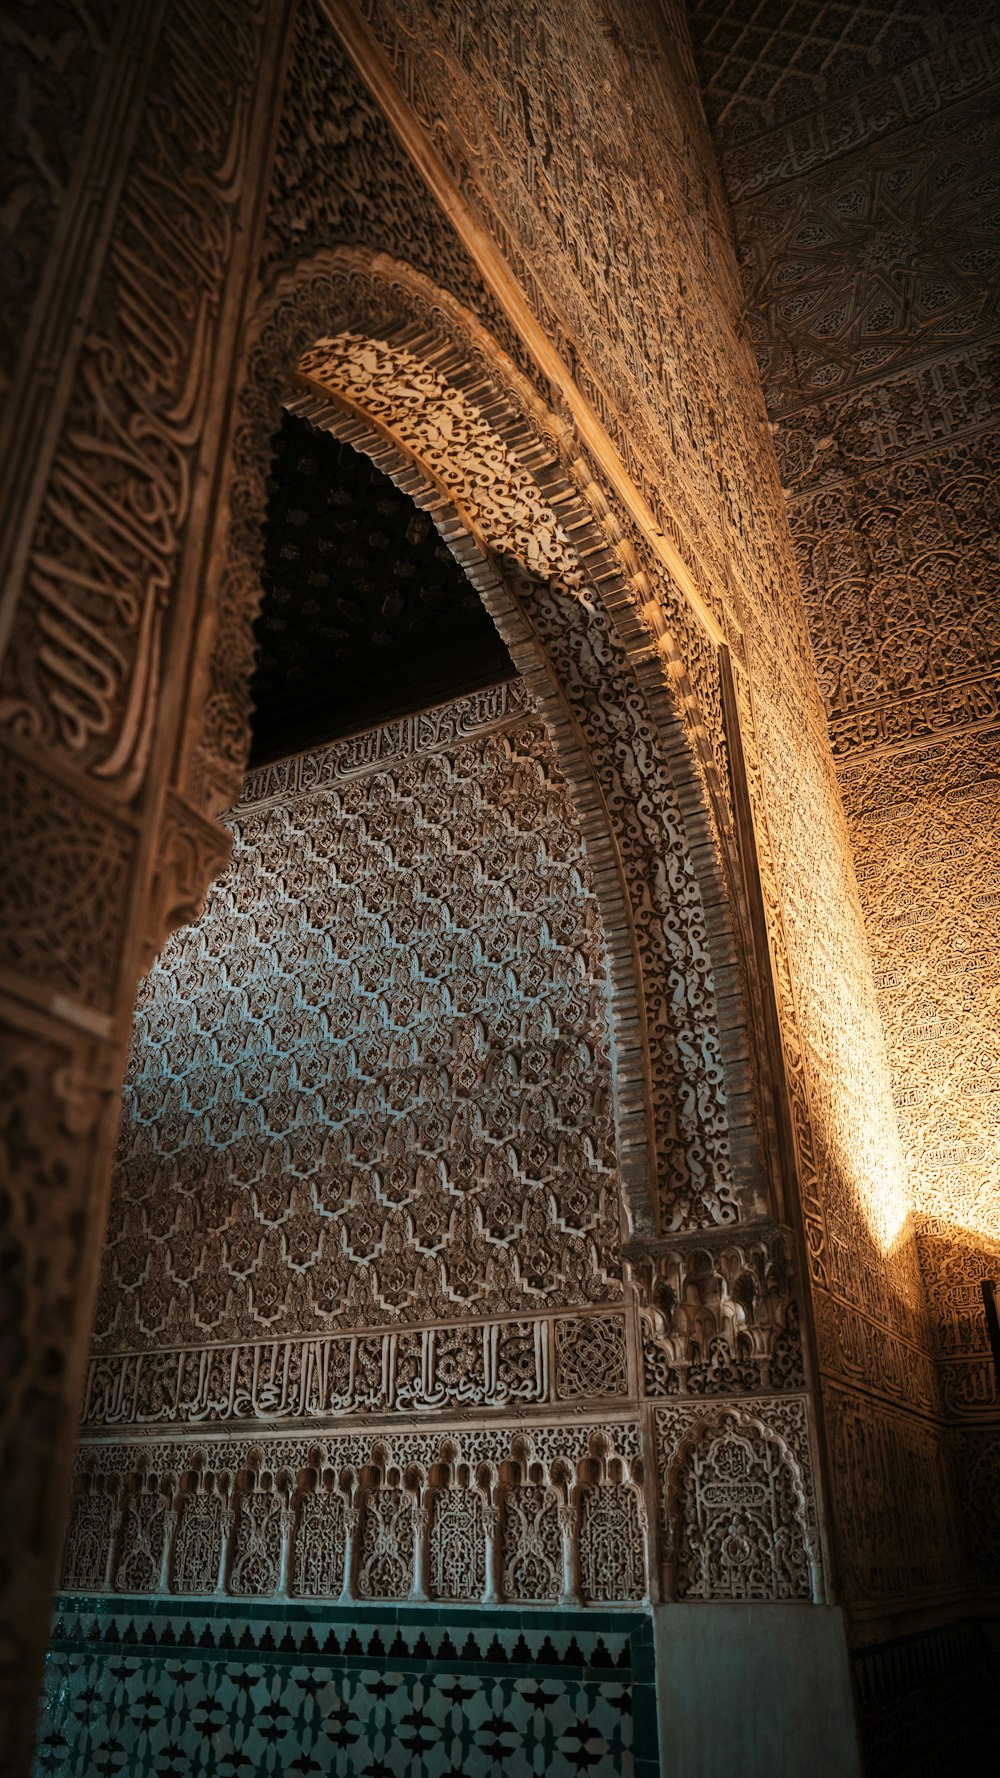 a large ornate ceiling with intricate carvings